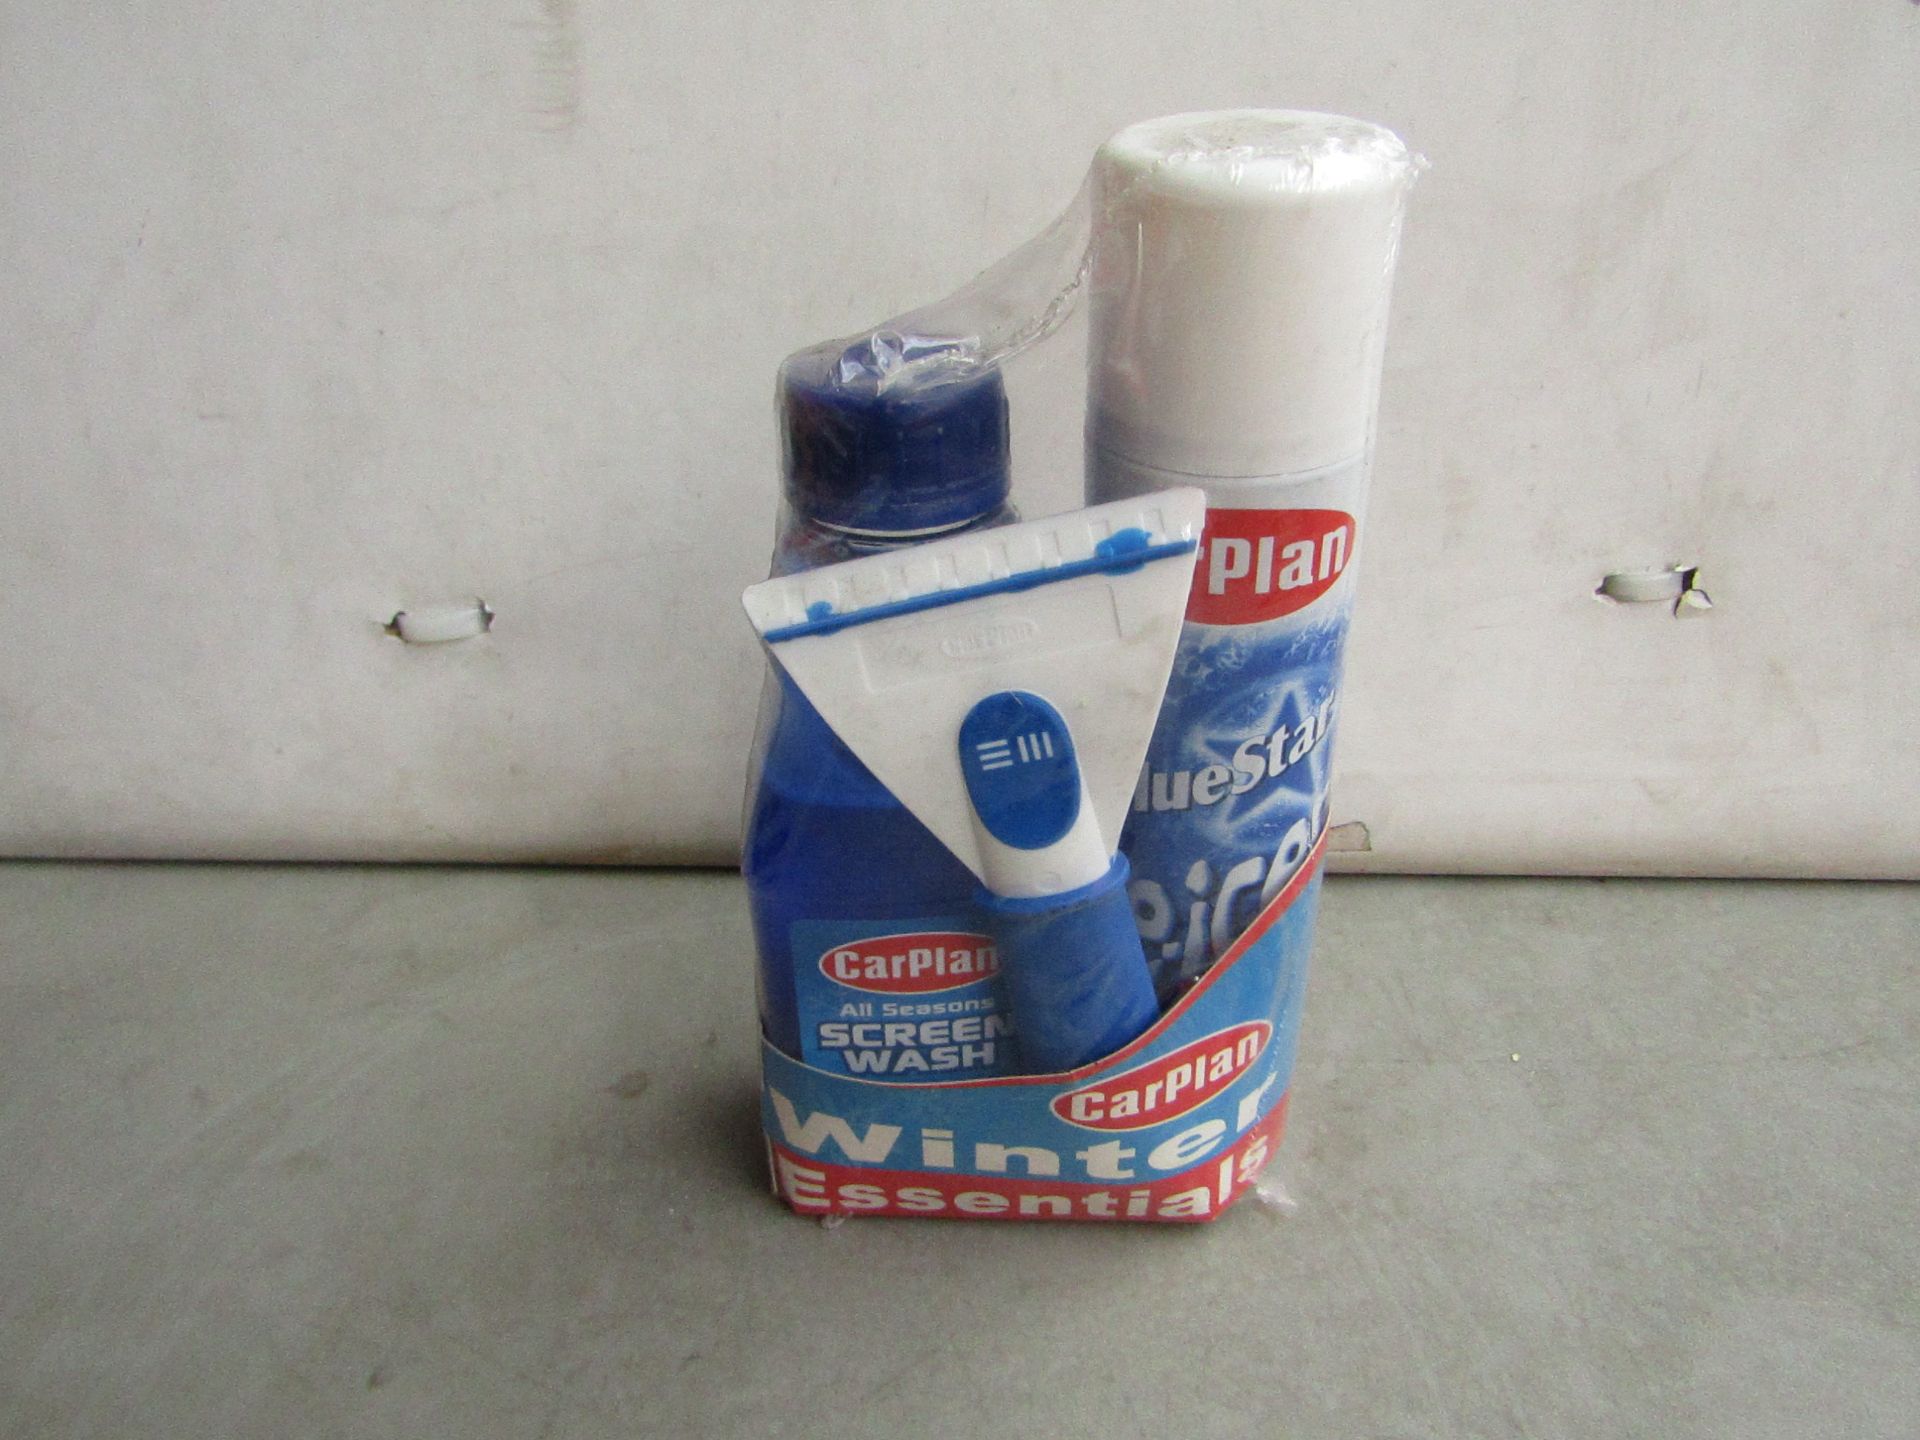 Carplan - Winter Clear Screen Pack - Contains : 1x De-icer 300ml. 1x Screnwash Concentrate 500ml. 1x